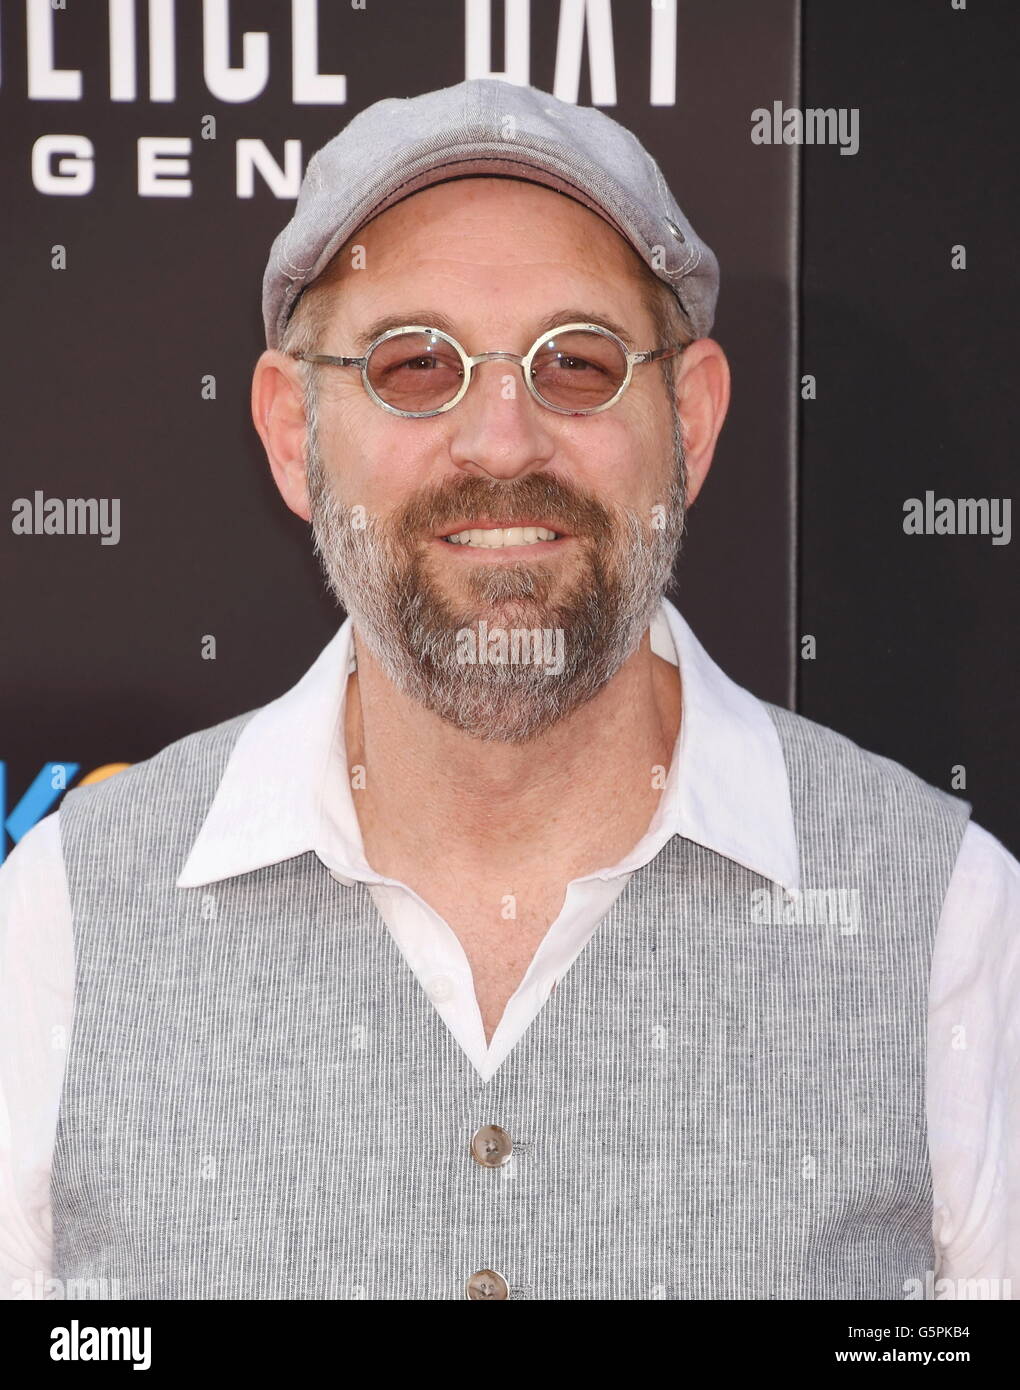 Hollywood, California. 20th June, 2016. HOLLYWOOD, CA - JUNE 20: Actor John Storey arrives at the premiere of 20th Century Fox's 'Independence Day: Resurgence' at TCL Chinese Theatre on June 20, 2016 in Hollywood, California. | Verwendung weltweit/picture alliance © dpa/Alamy Live News Stock Photo